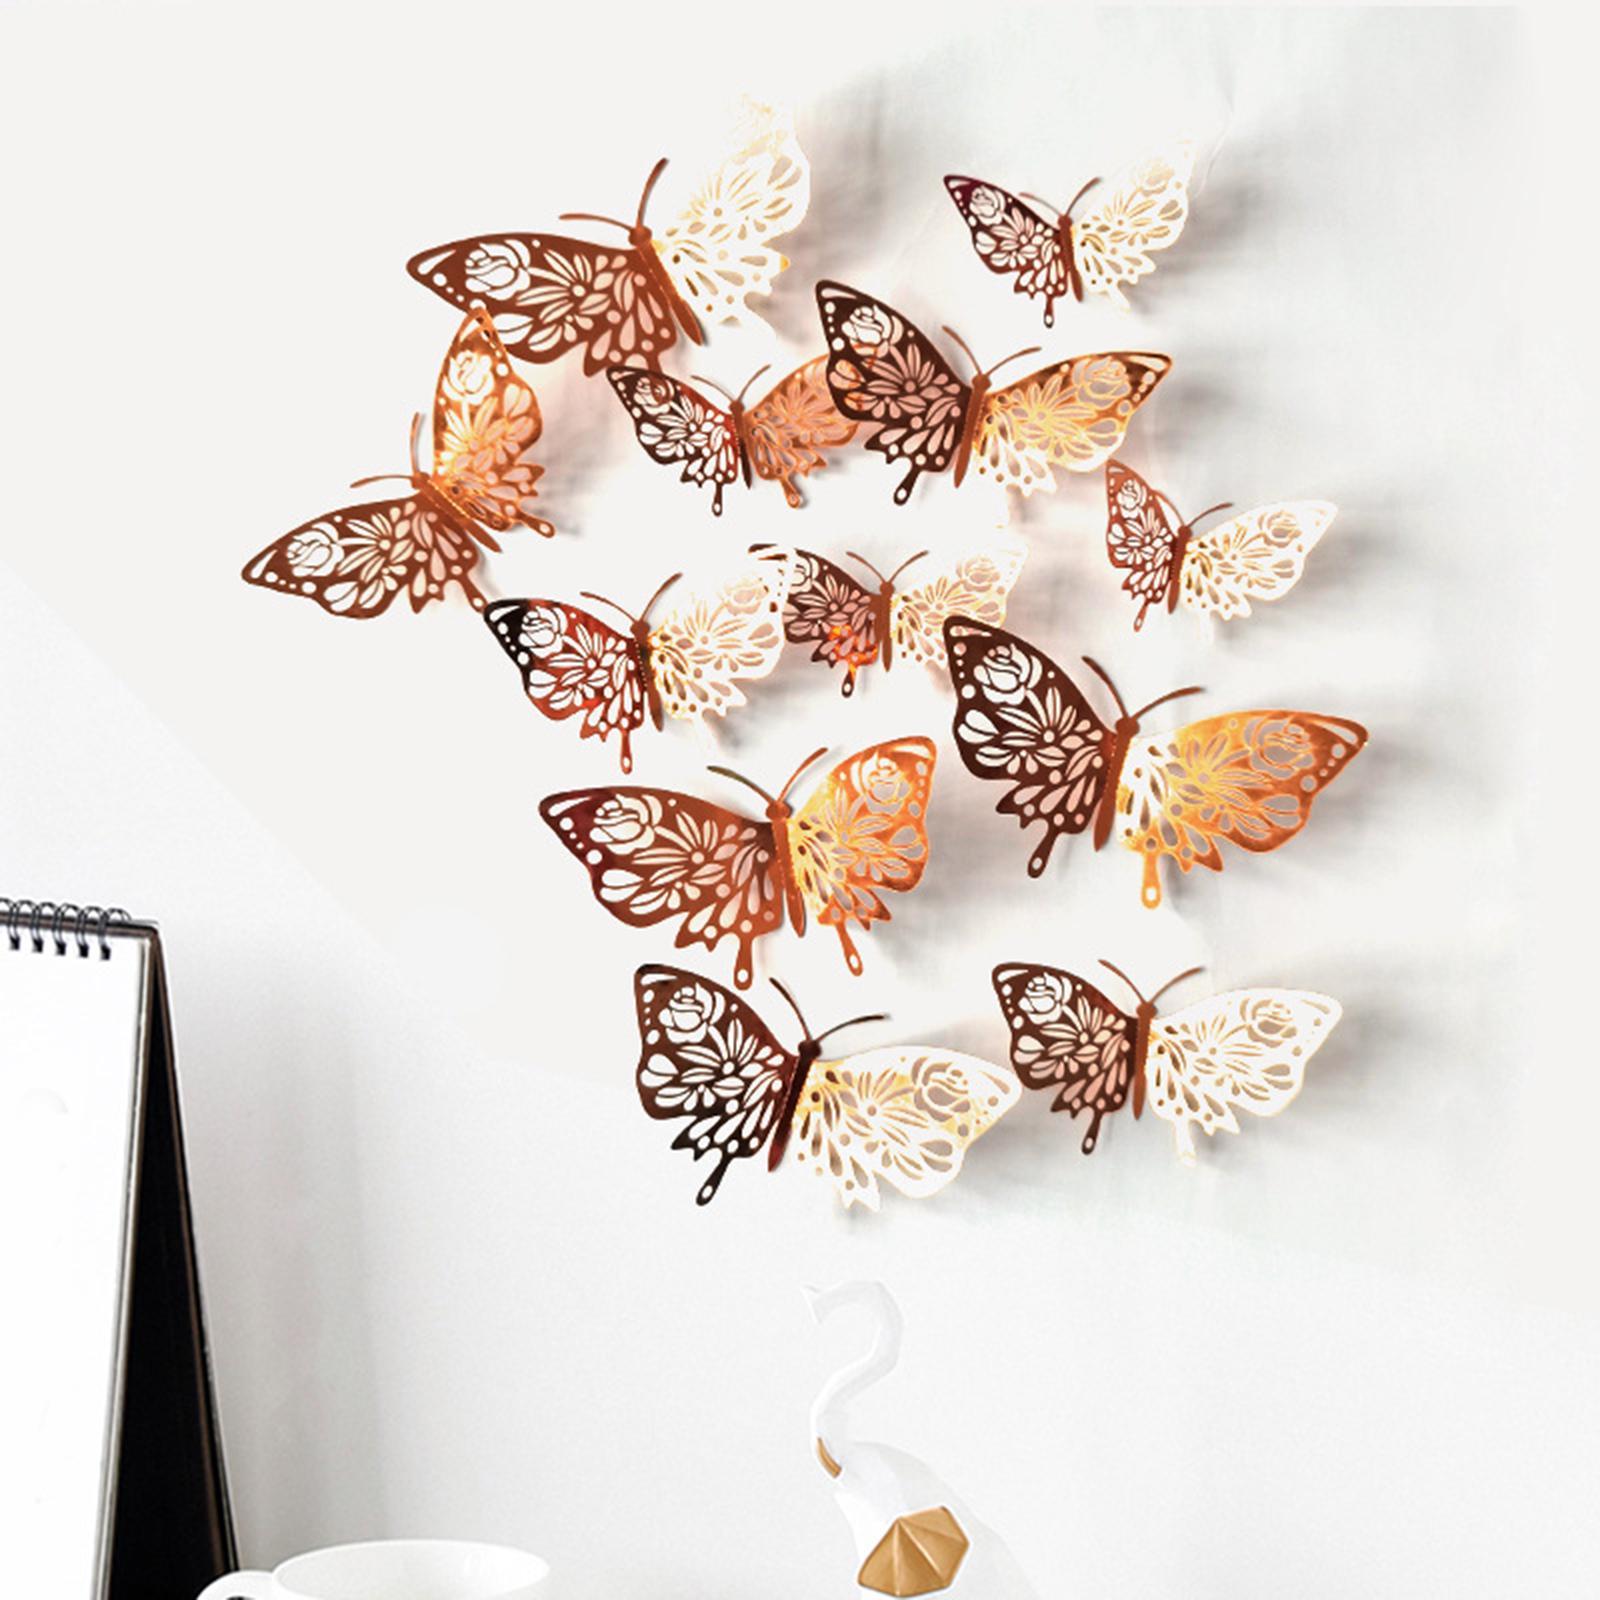 12pcs 3D Butterfly Wall Stickers Art Decals Home Room Decorations ...